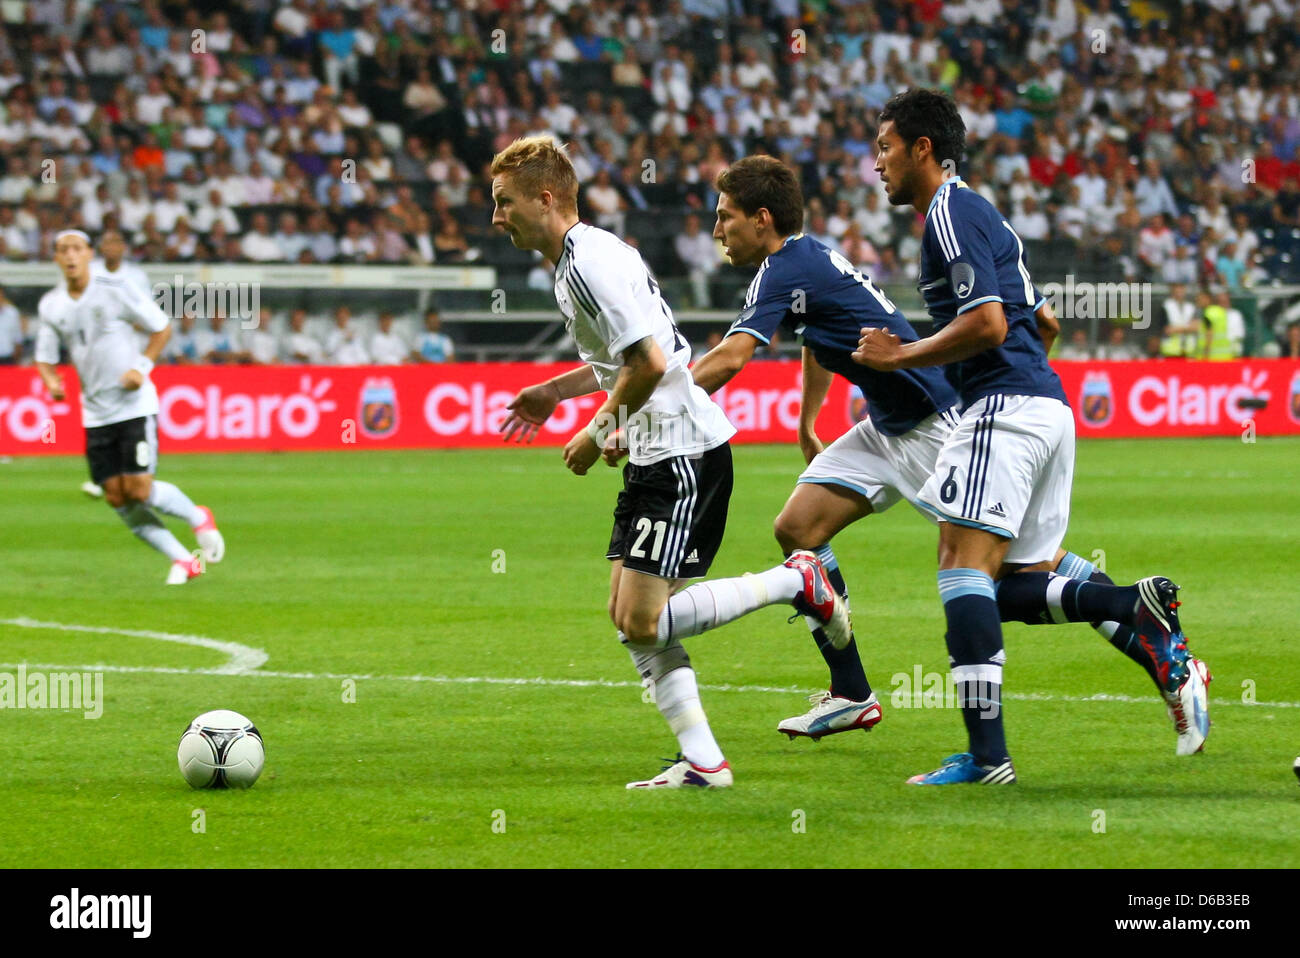 Germany's Marco Reus (L) vies for the ball with Argentina's Federico Fernandez (C) and Fernando Gago during the friendly soccer match between Germany and Argentina at the Commerzbank-Arena in Frankfurt/Main, Germany, 15 August 2012. Photo: Revierfoto Stock Photo